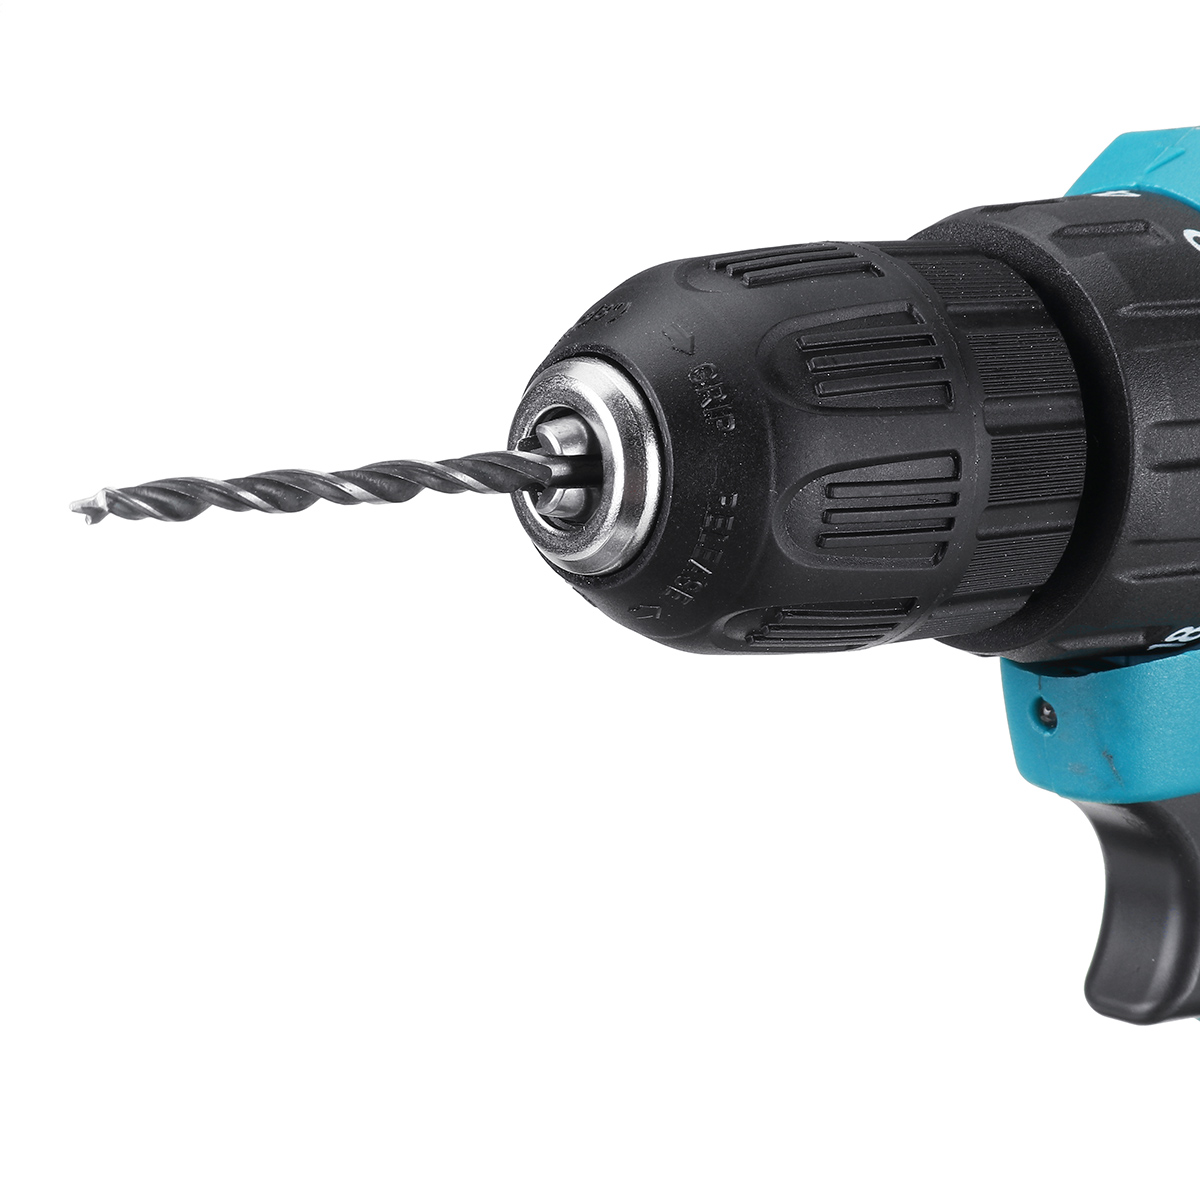 2000rpm-38Nm-21V-Lithium-Electric-Impact-Hammer-Drill-Wood-Drilling-Screwdrivers-with-Battery-1943477-28